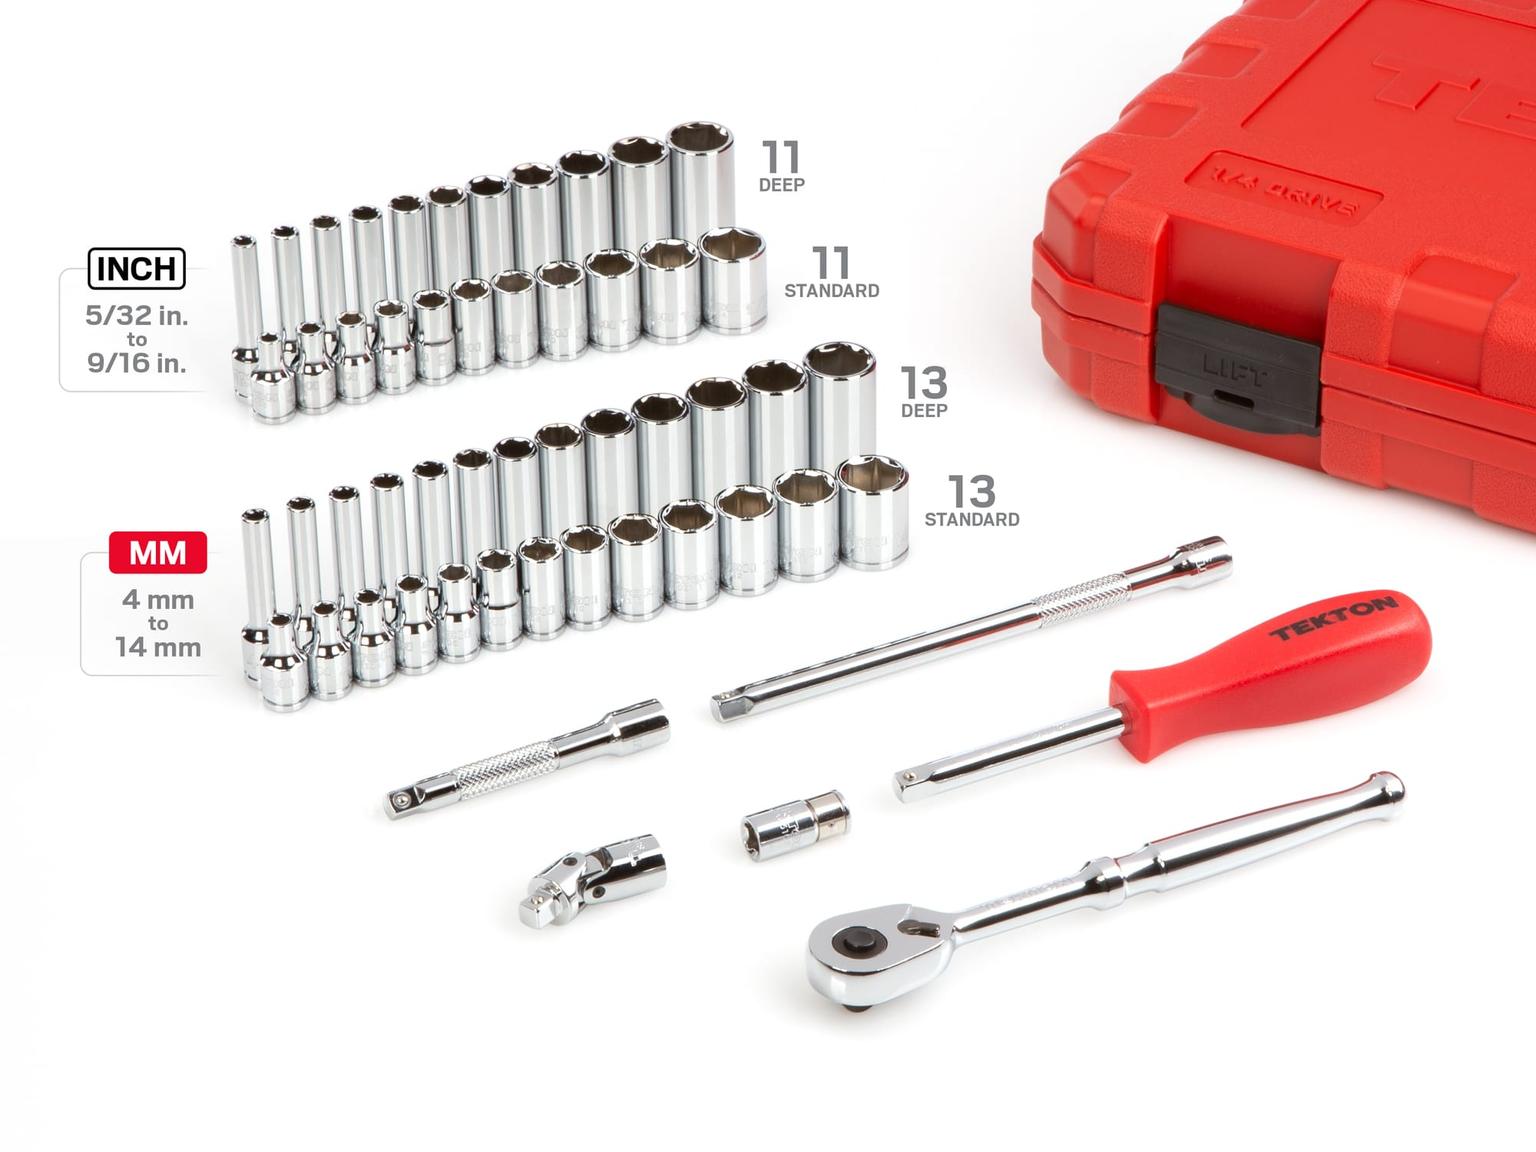 TEKTON SKT05301-D 1/4 Inch Drive 6-Point Socket and Ratchet Set, 55-Piece (5/32-9/16 in., 4-14 mm)